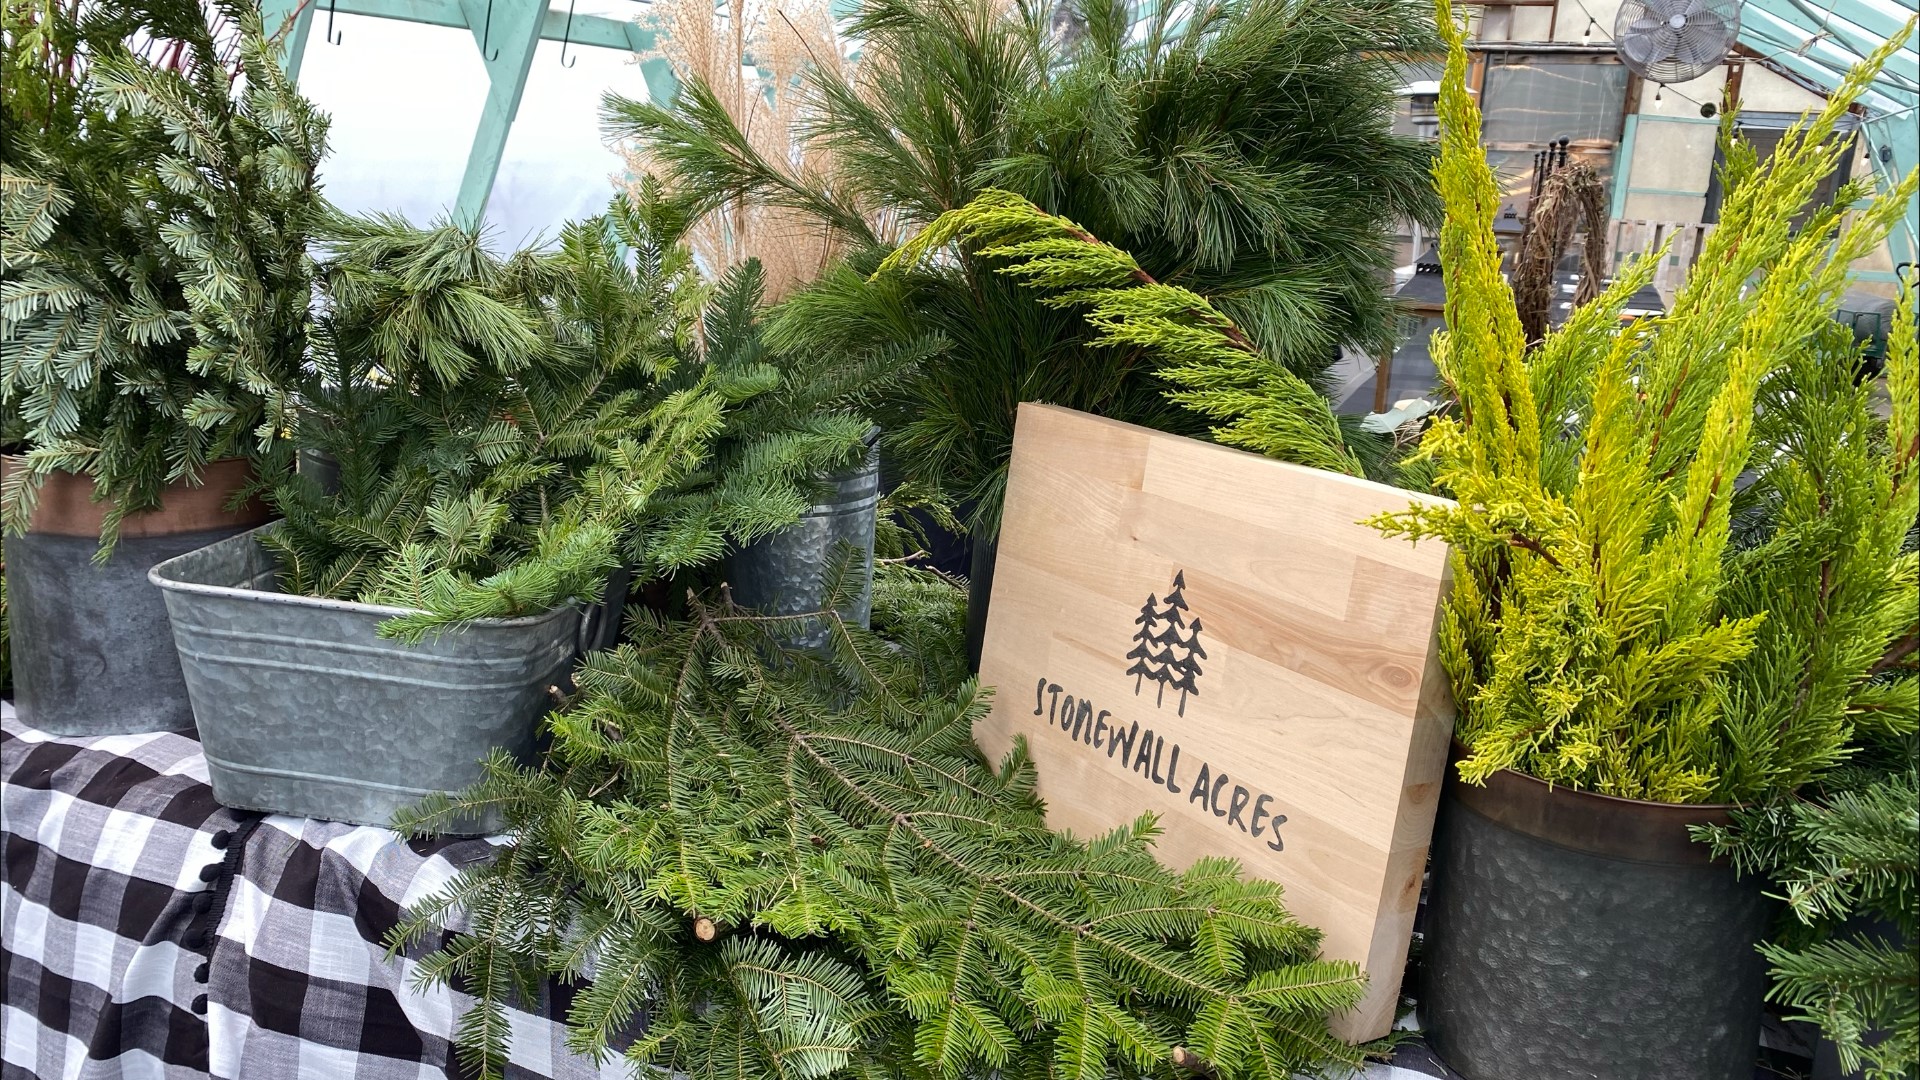 It’s become a tradition each holiday season, since the pandemic, Stonewall Acres has been offering its popular “Wreath Making Workshops."